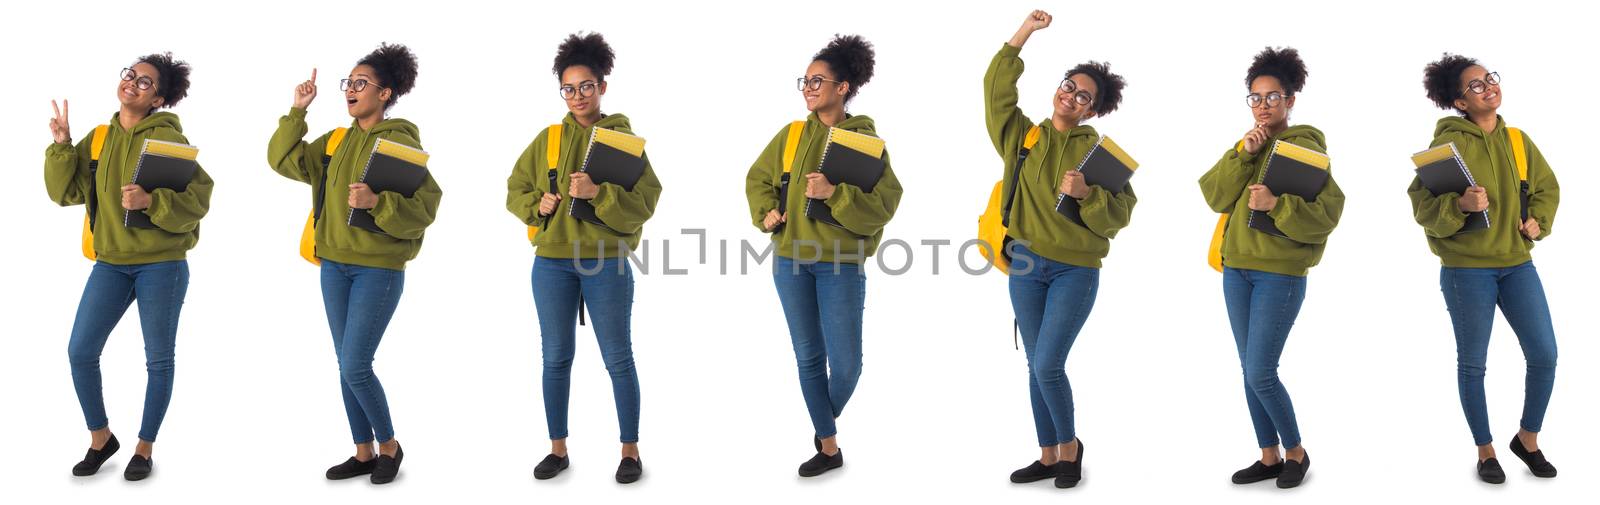 Set of full length portraits of smiling african student carrying a backpack and holding copybooks isolated on white background